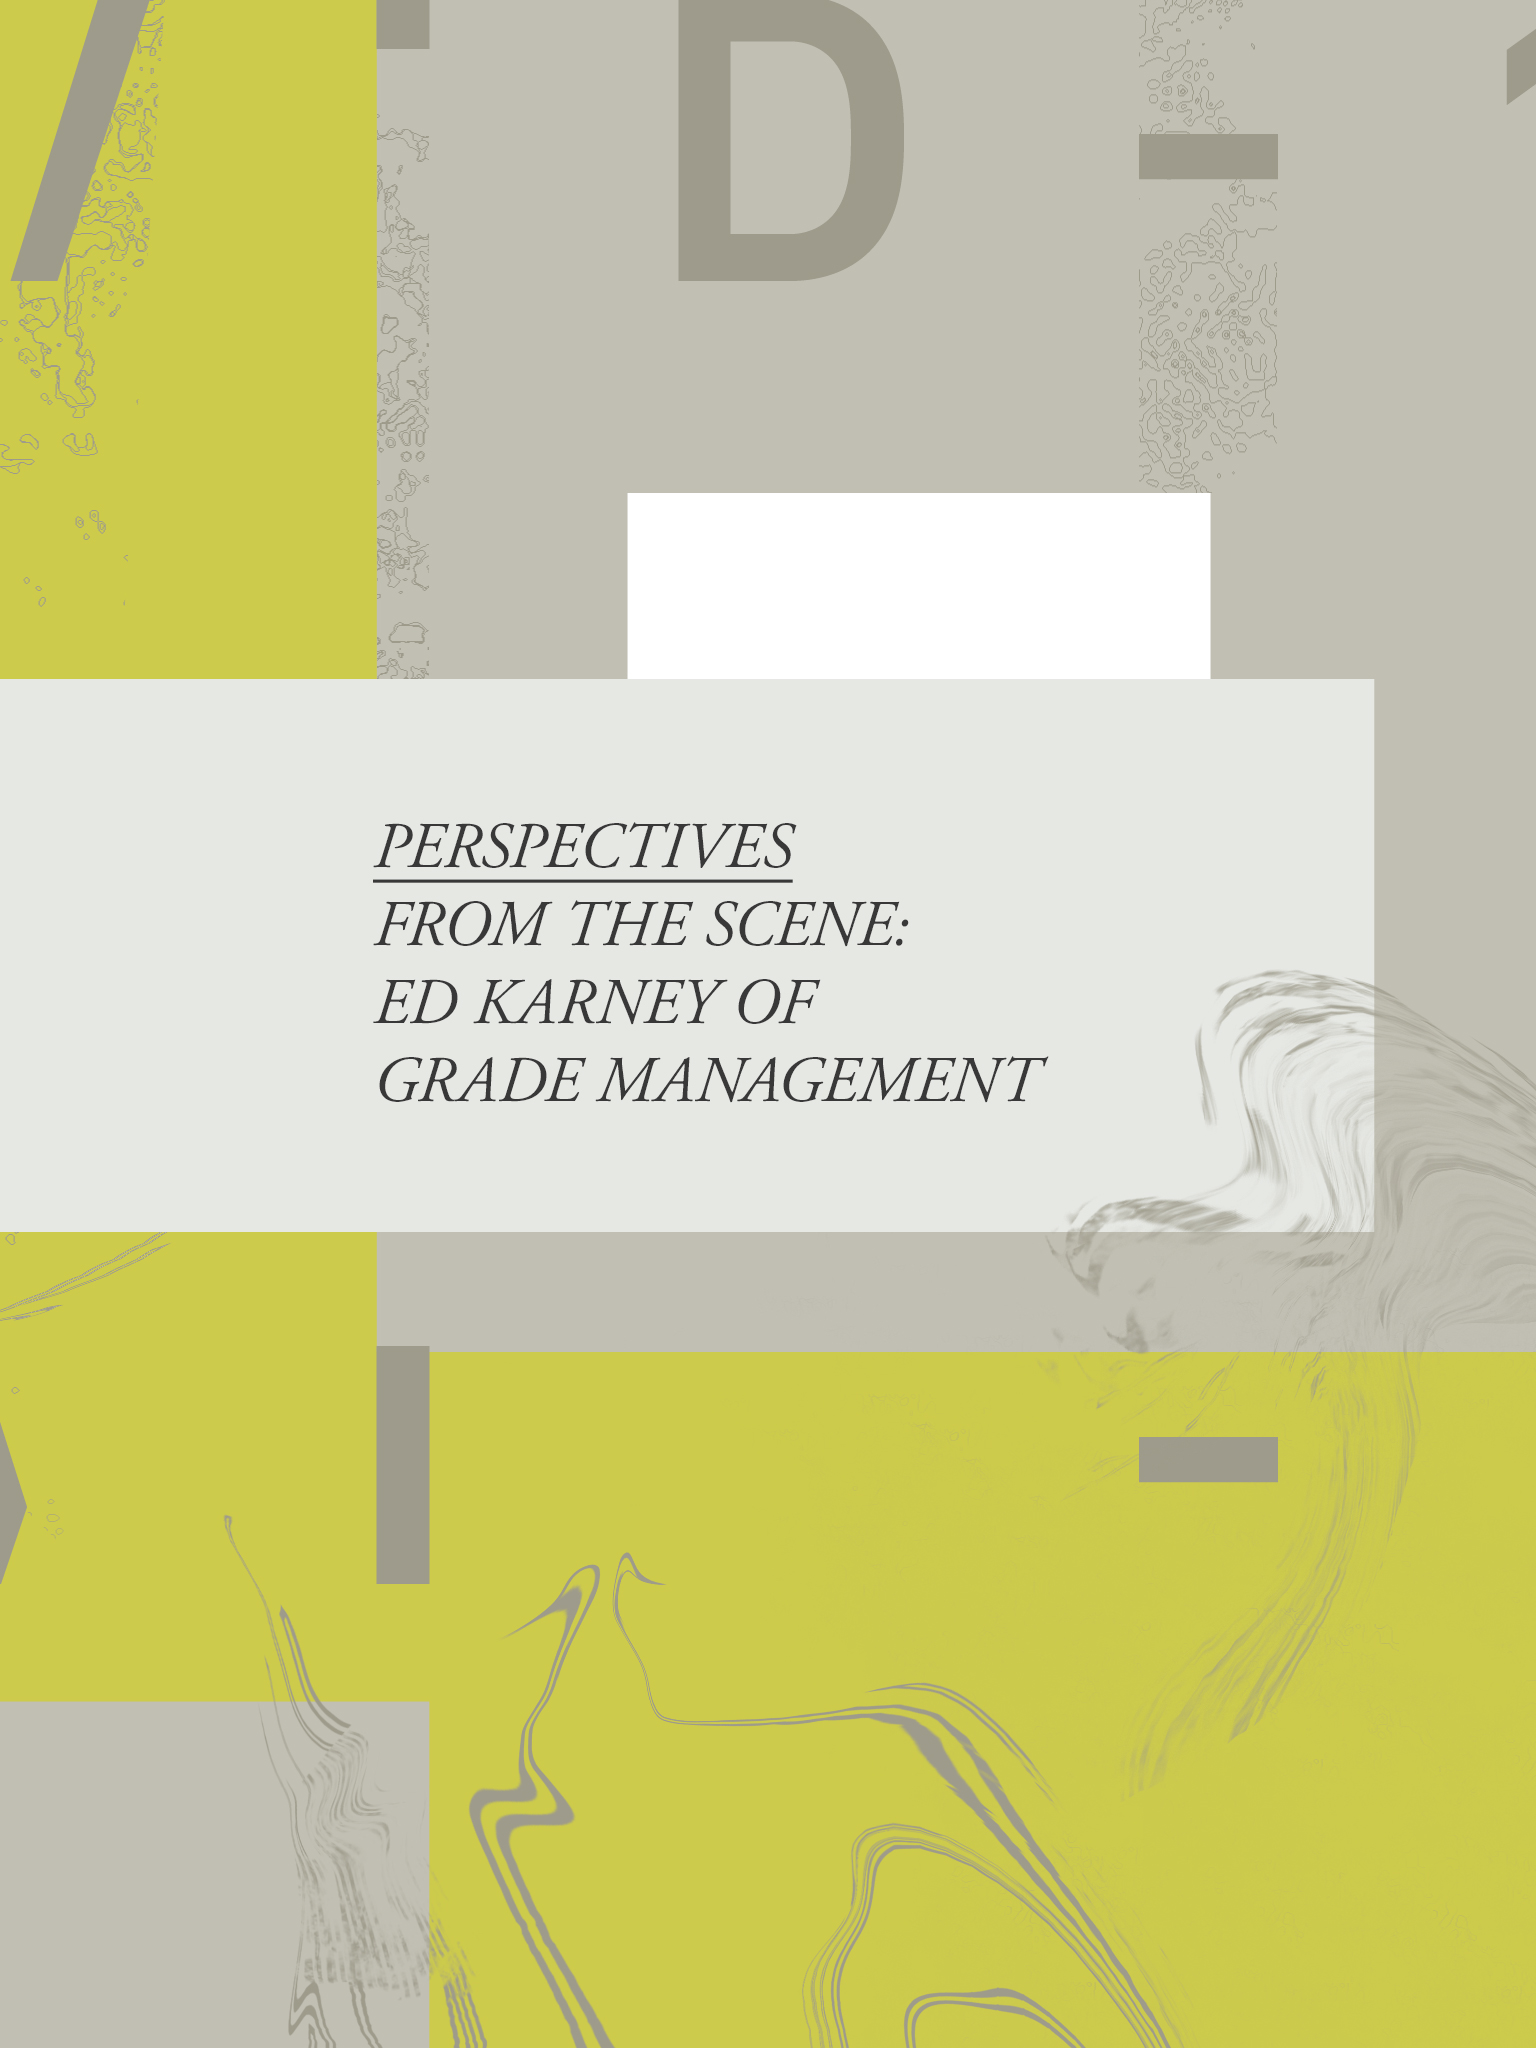 Perspectives From The Scene: Ed Karney of Grade Management